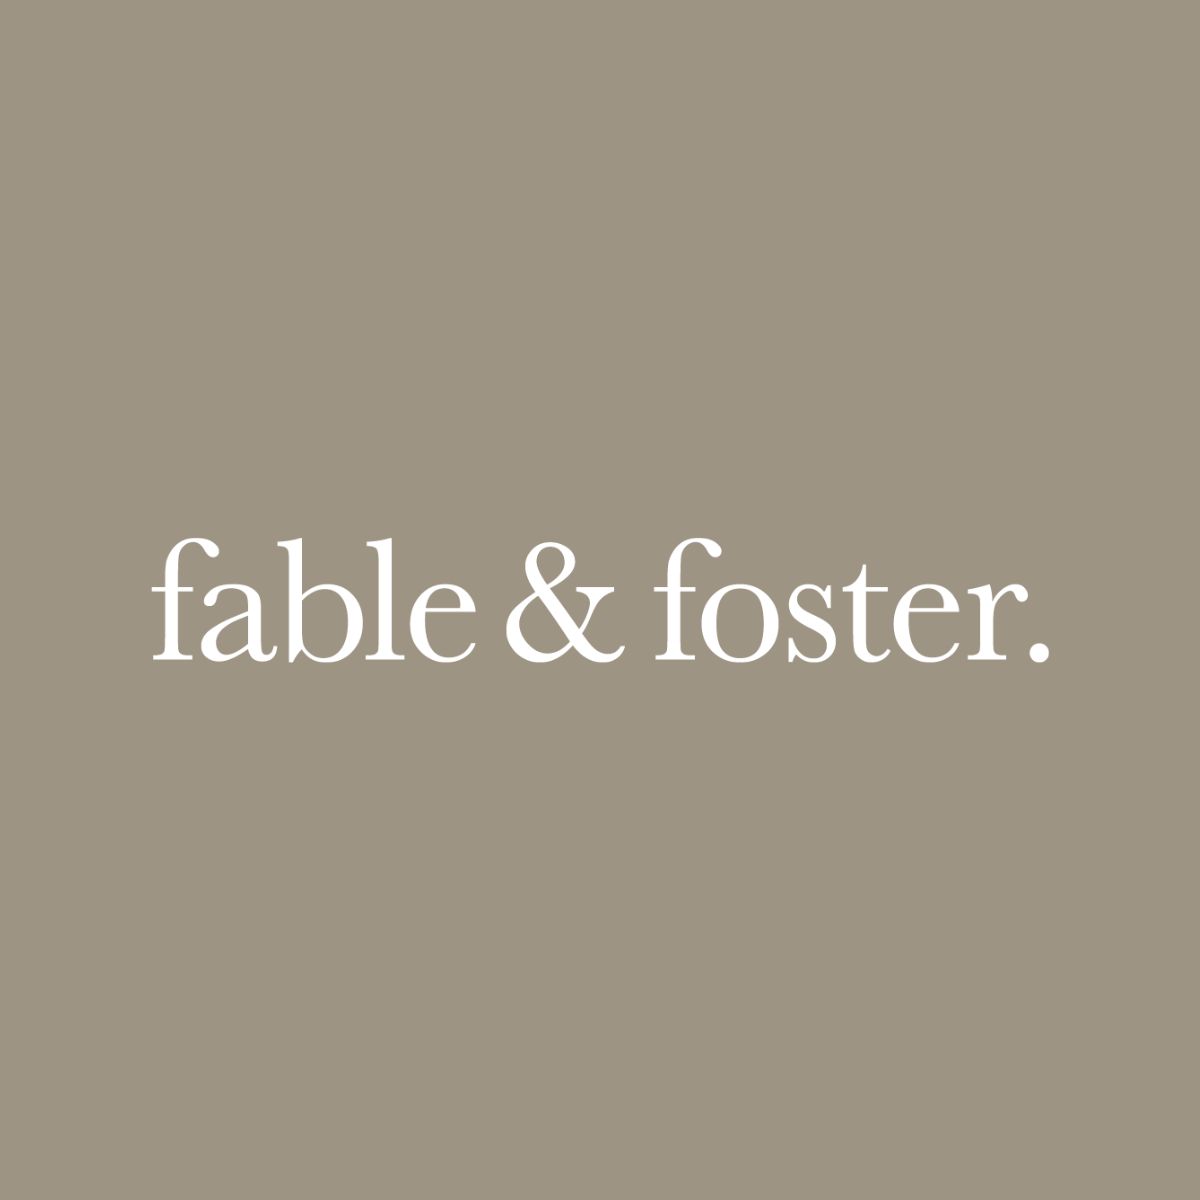 Fable and Foster.